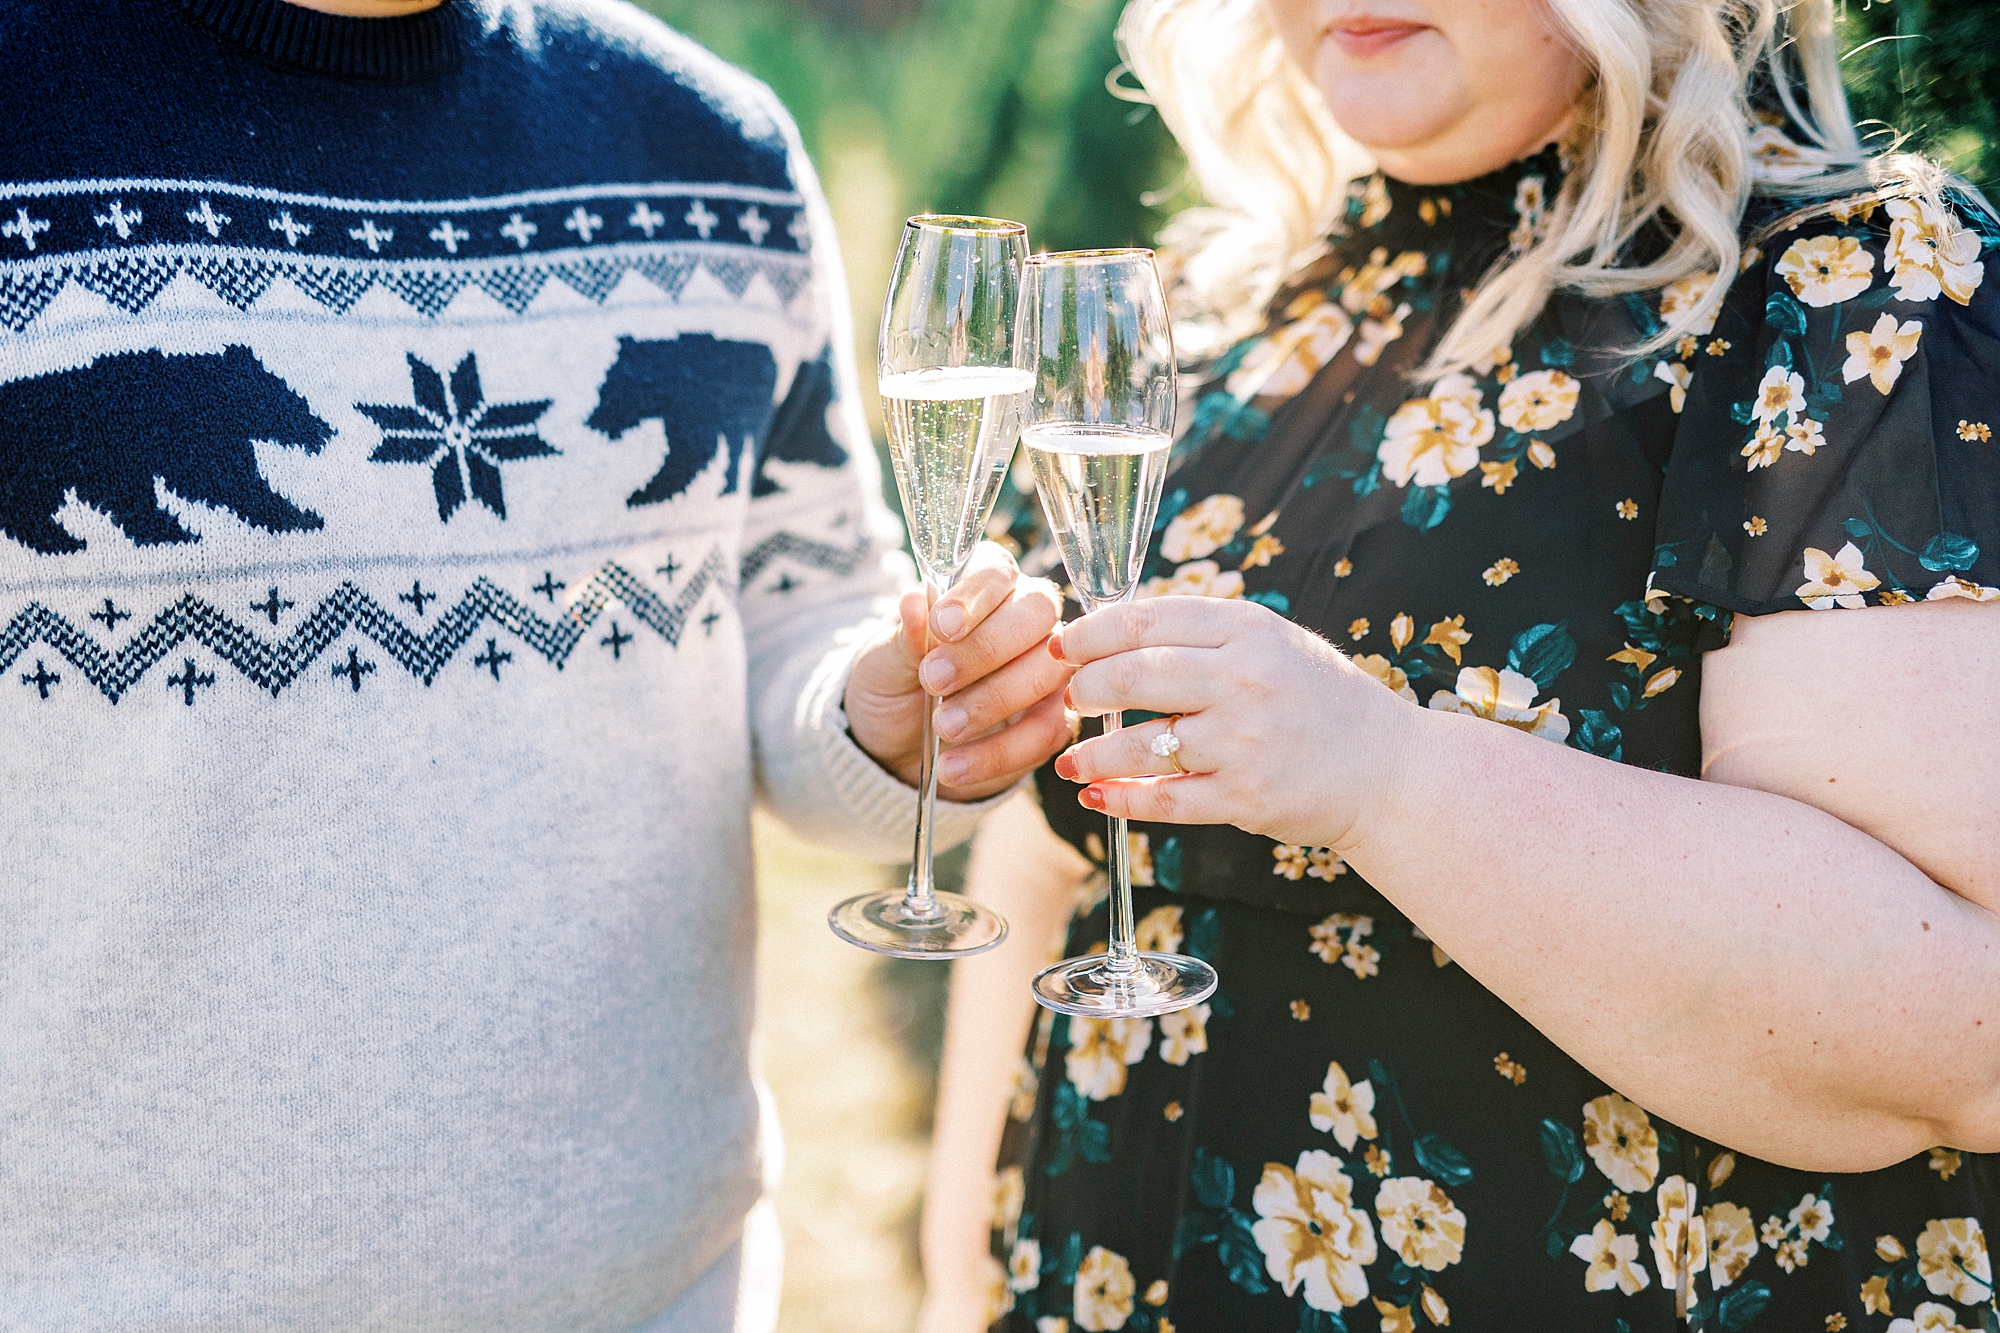 engaged couple toasts Champagne glasses during holiday mini sessions at tree farm